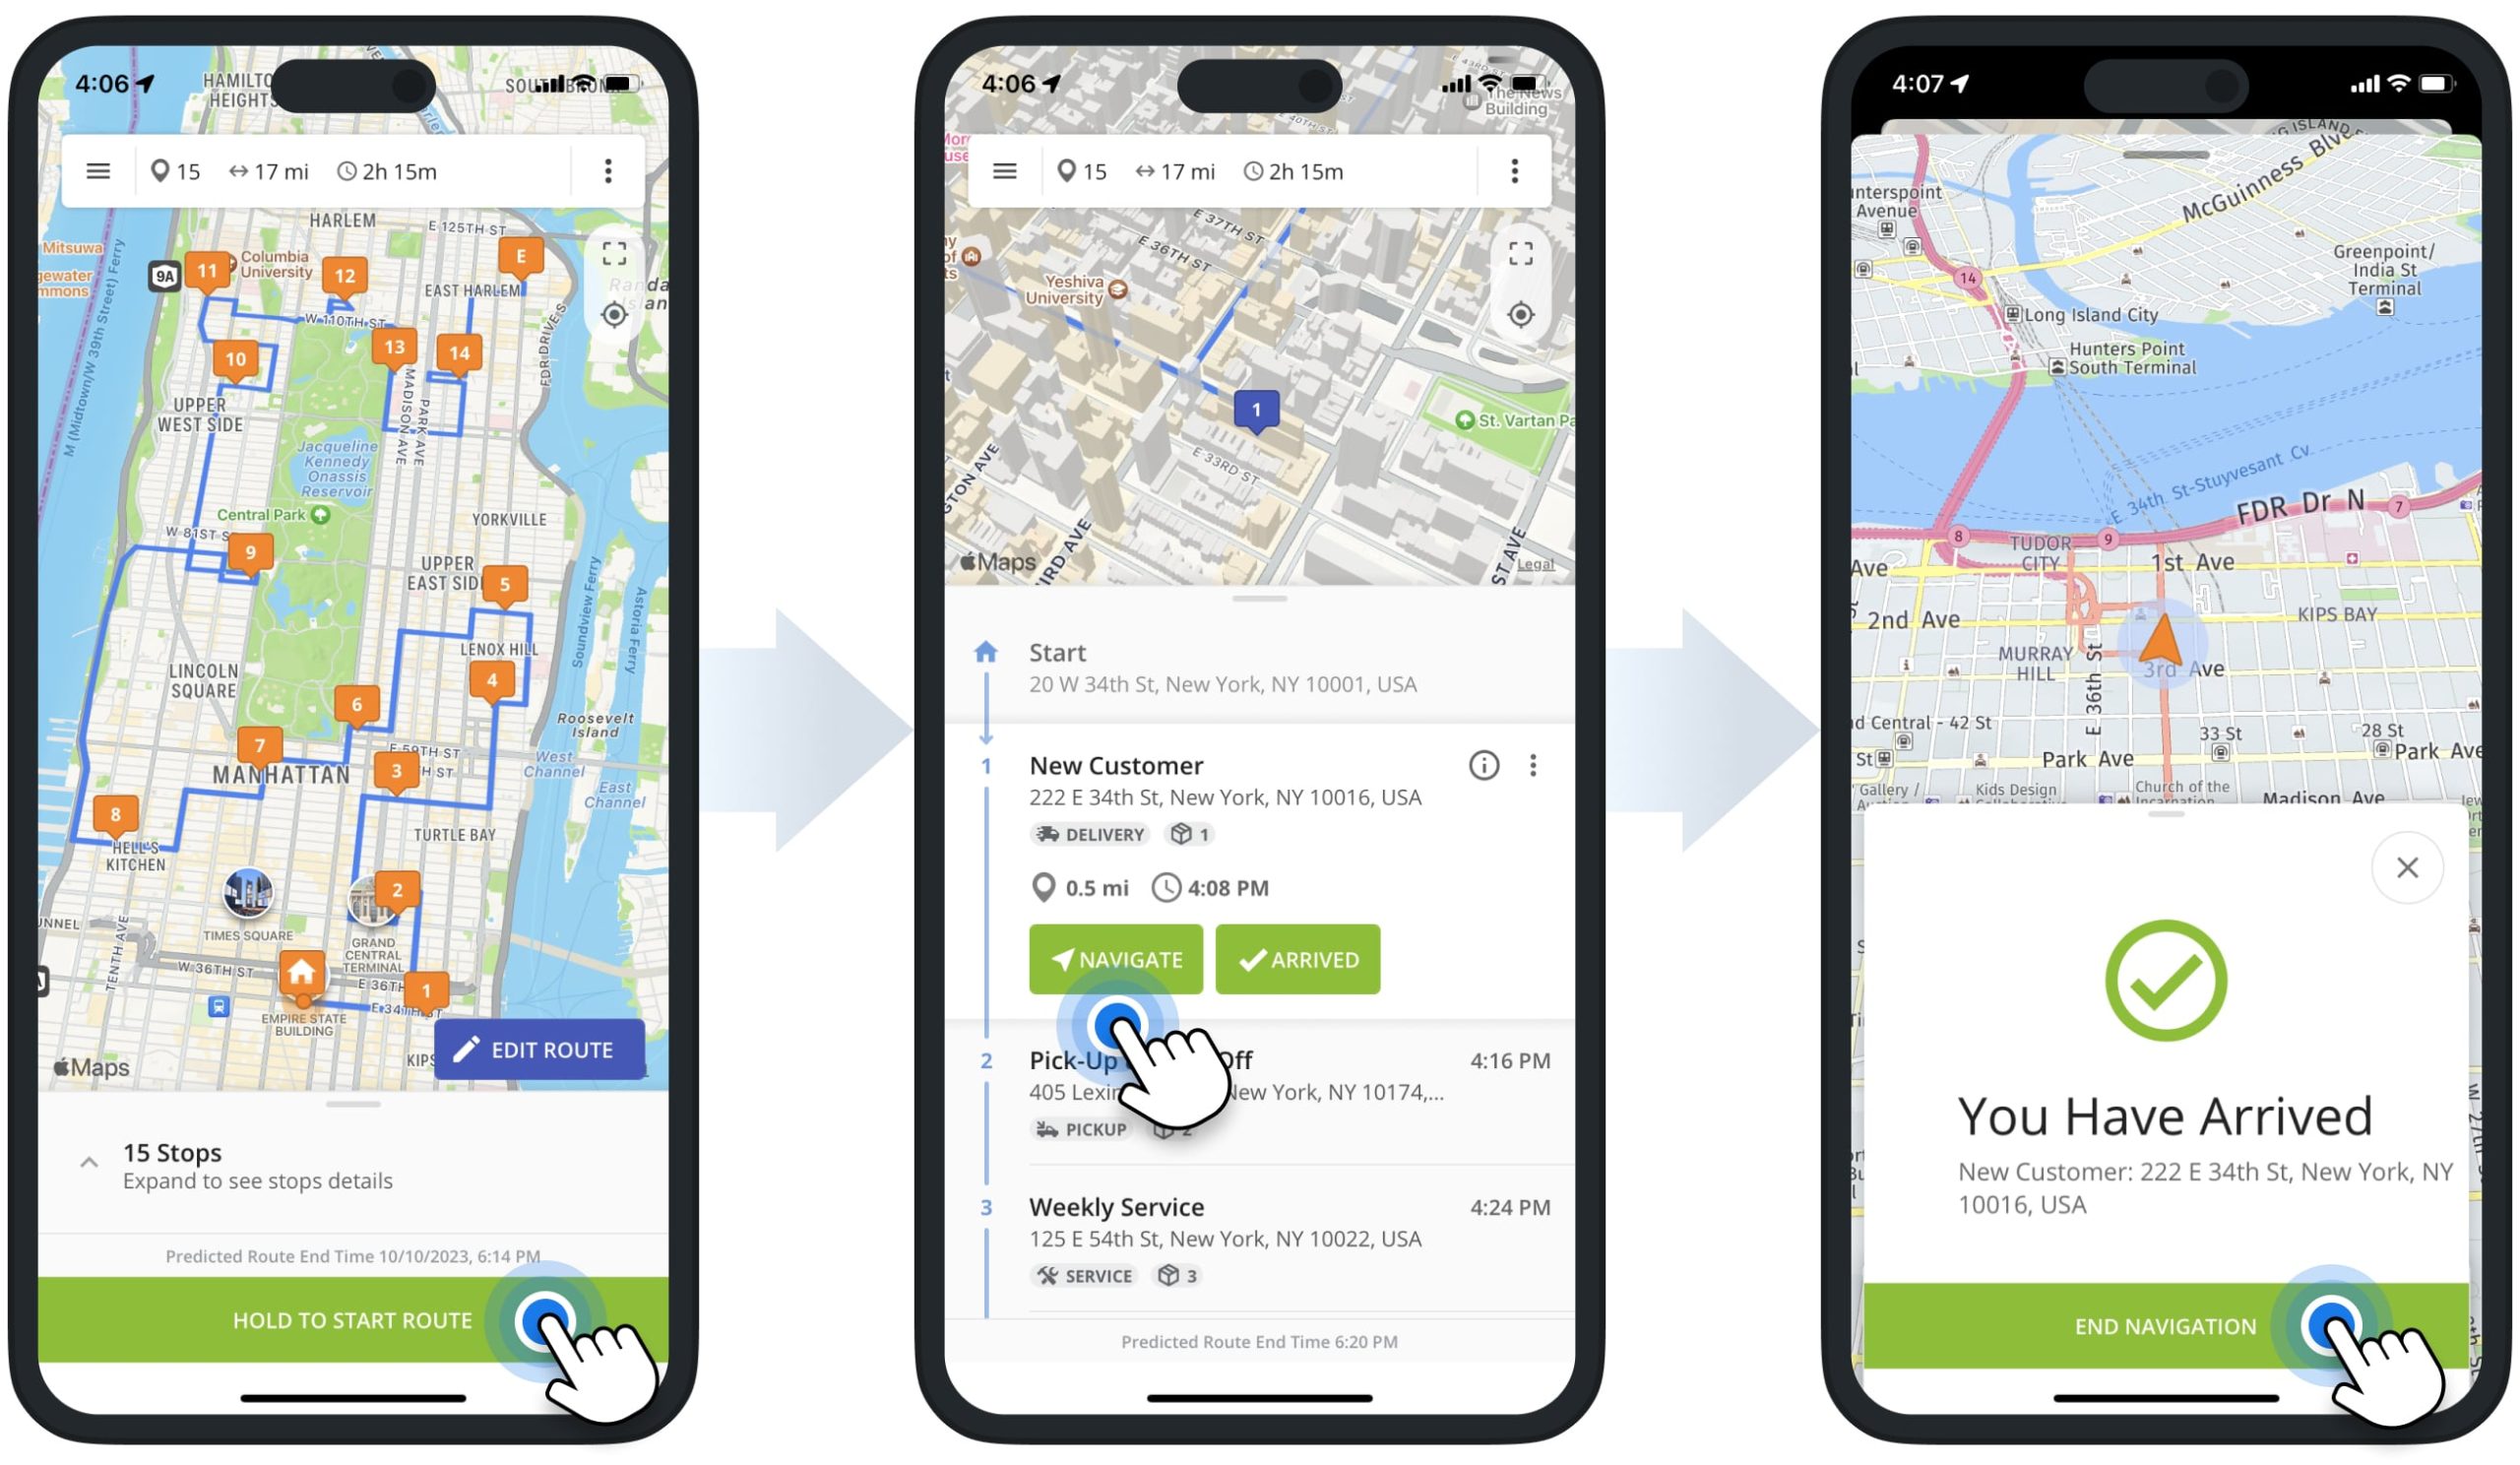 Opening, starting, and navigating multi-address routes on Route4Me's iPhone Multi-Stop Route Planning app.